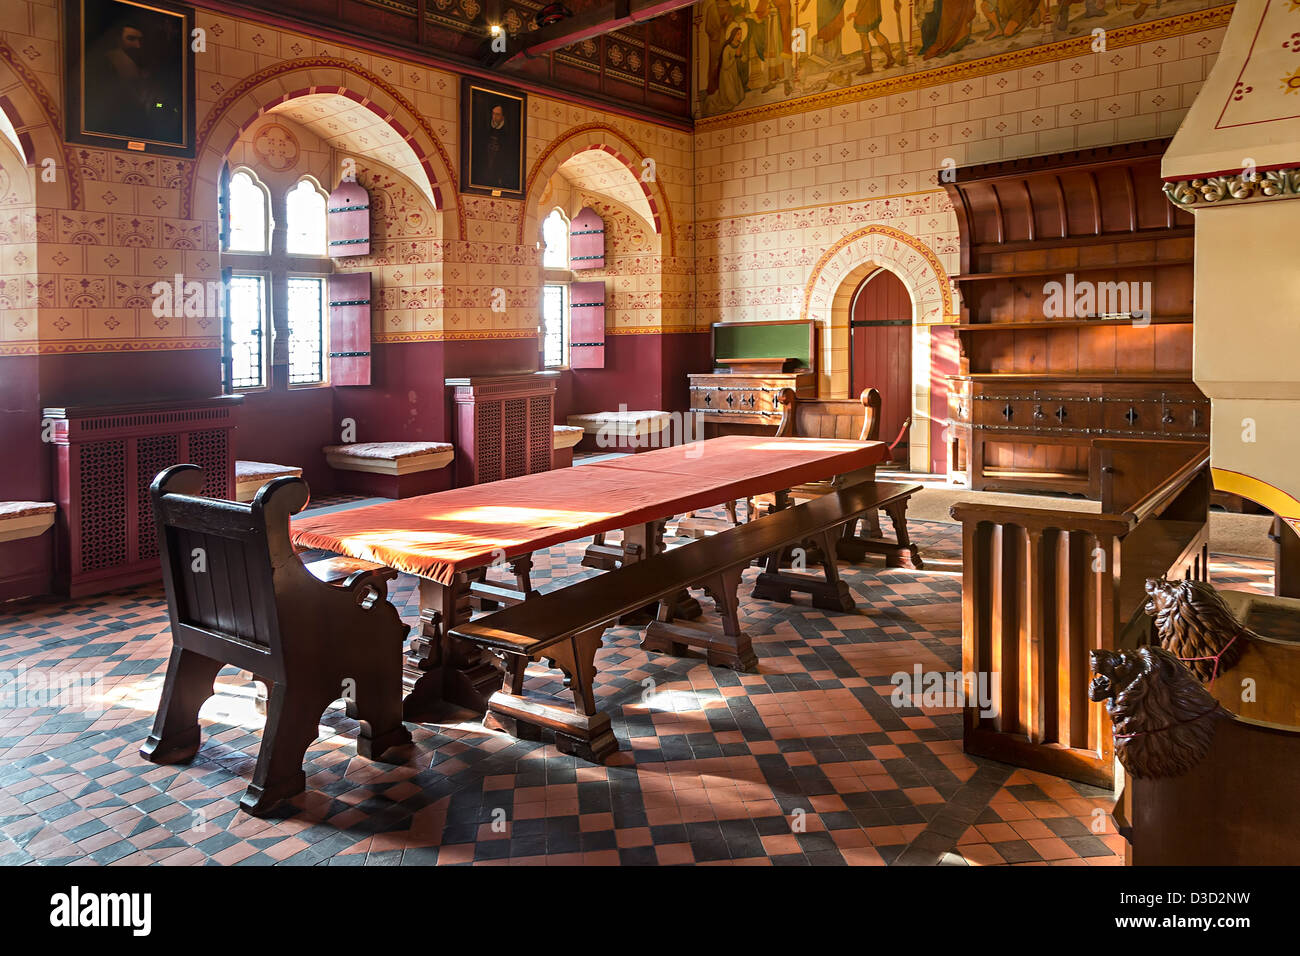 Interior of dining hall, Castell Coch castle, Tongwynlais, Cardiff, Wales, UK Stock Photo